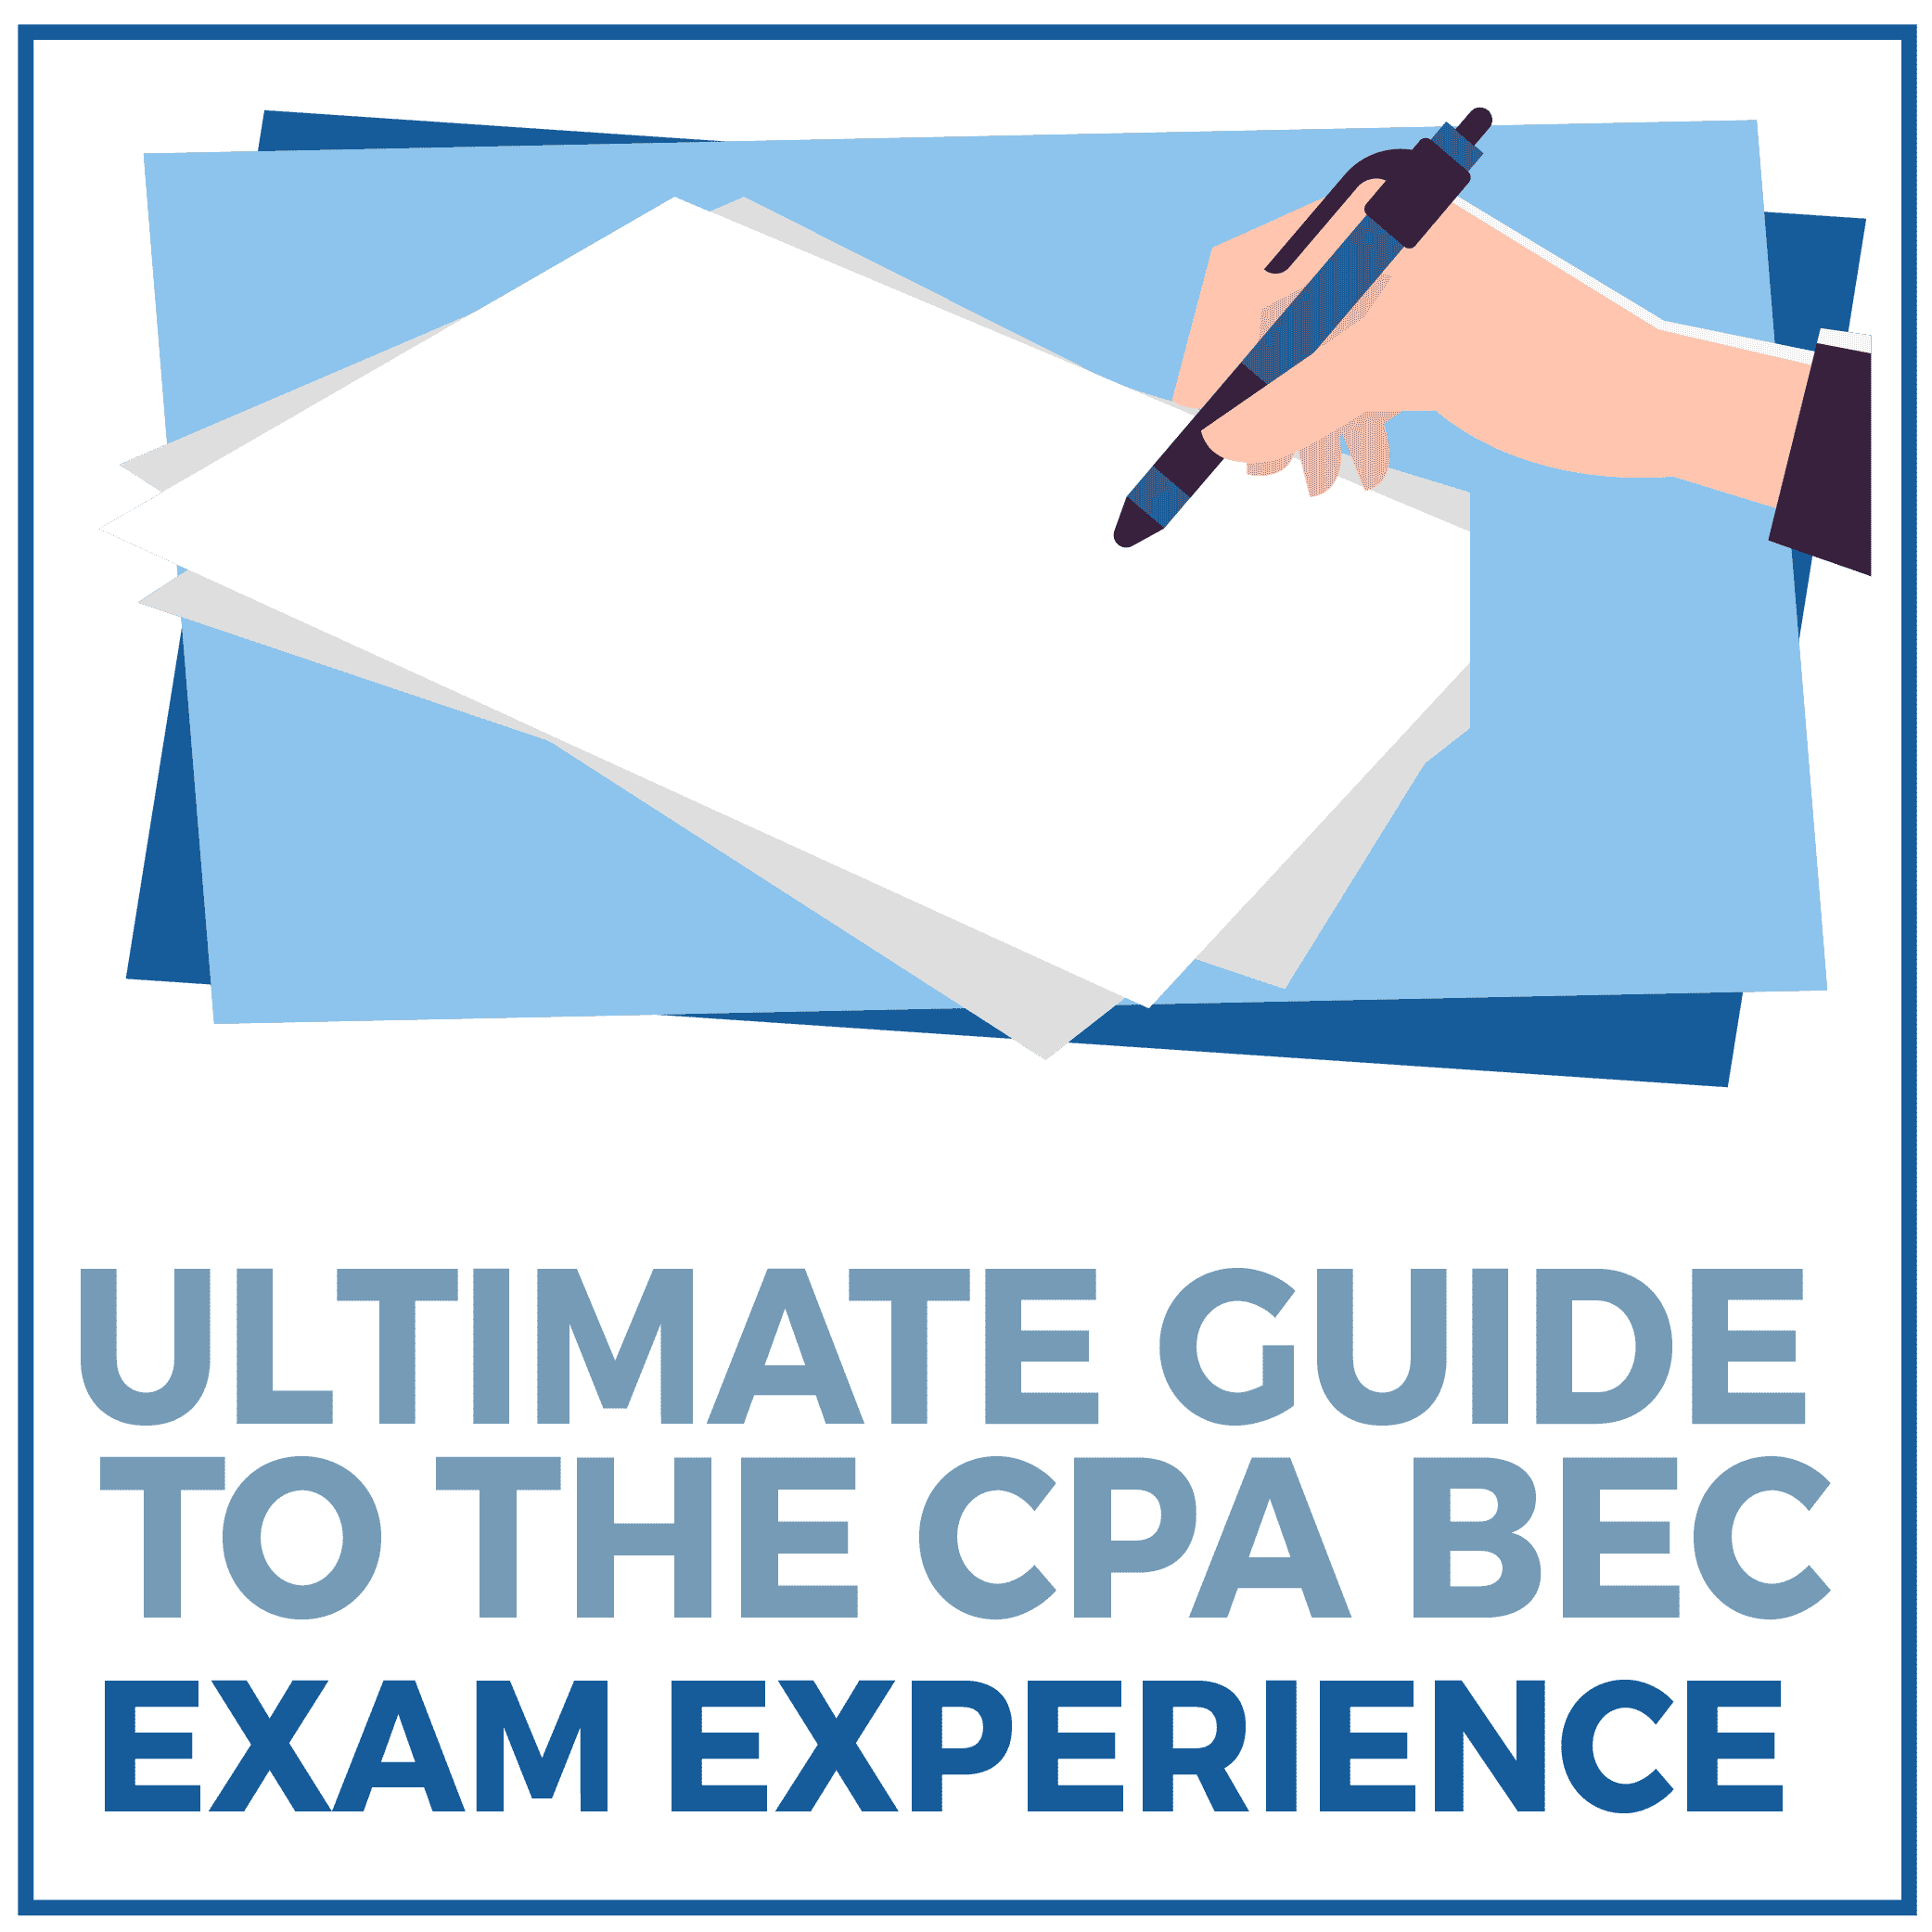 Ultimate Guide to the CPA BEC Exam Experience